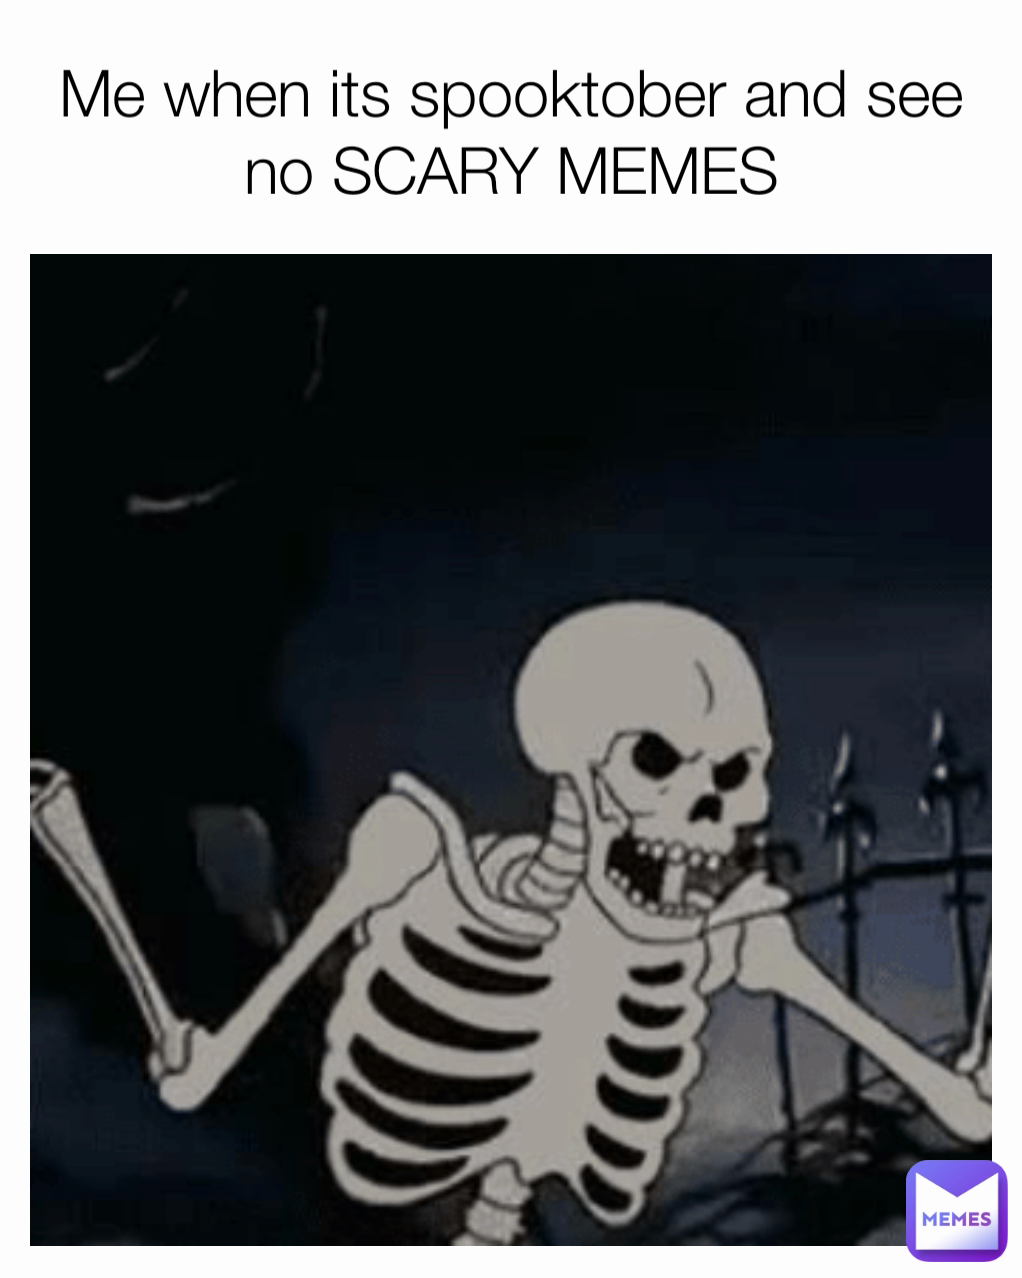 Me when its spooktober and see no SCARY MEMES